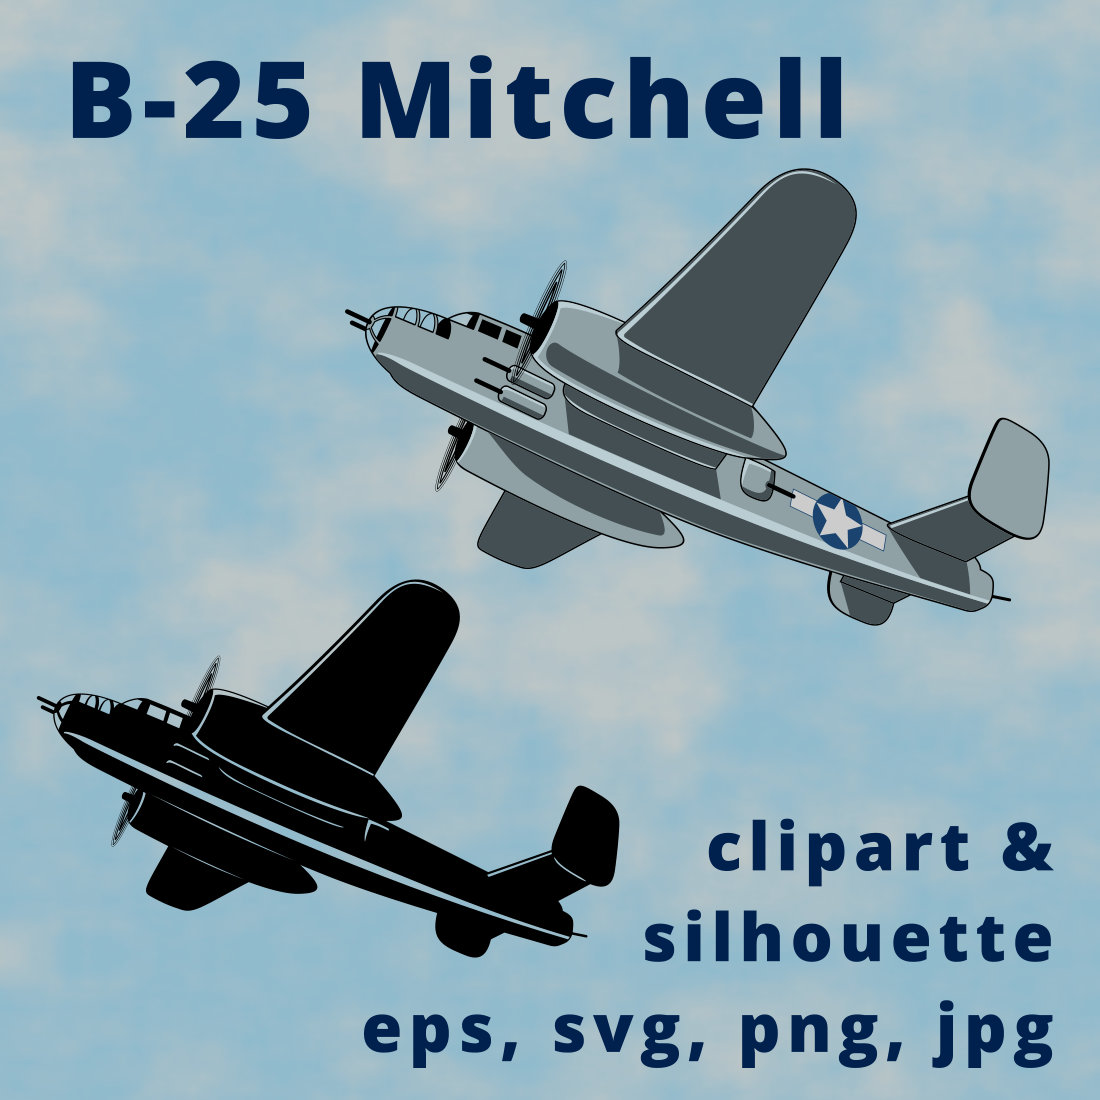 B-25 Mitchell USA Bomber Clipart cover image.